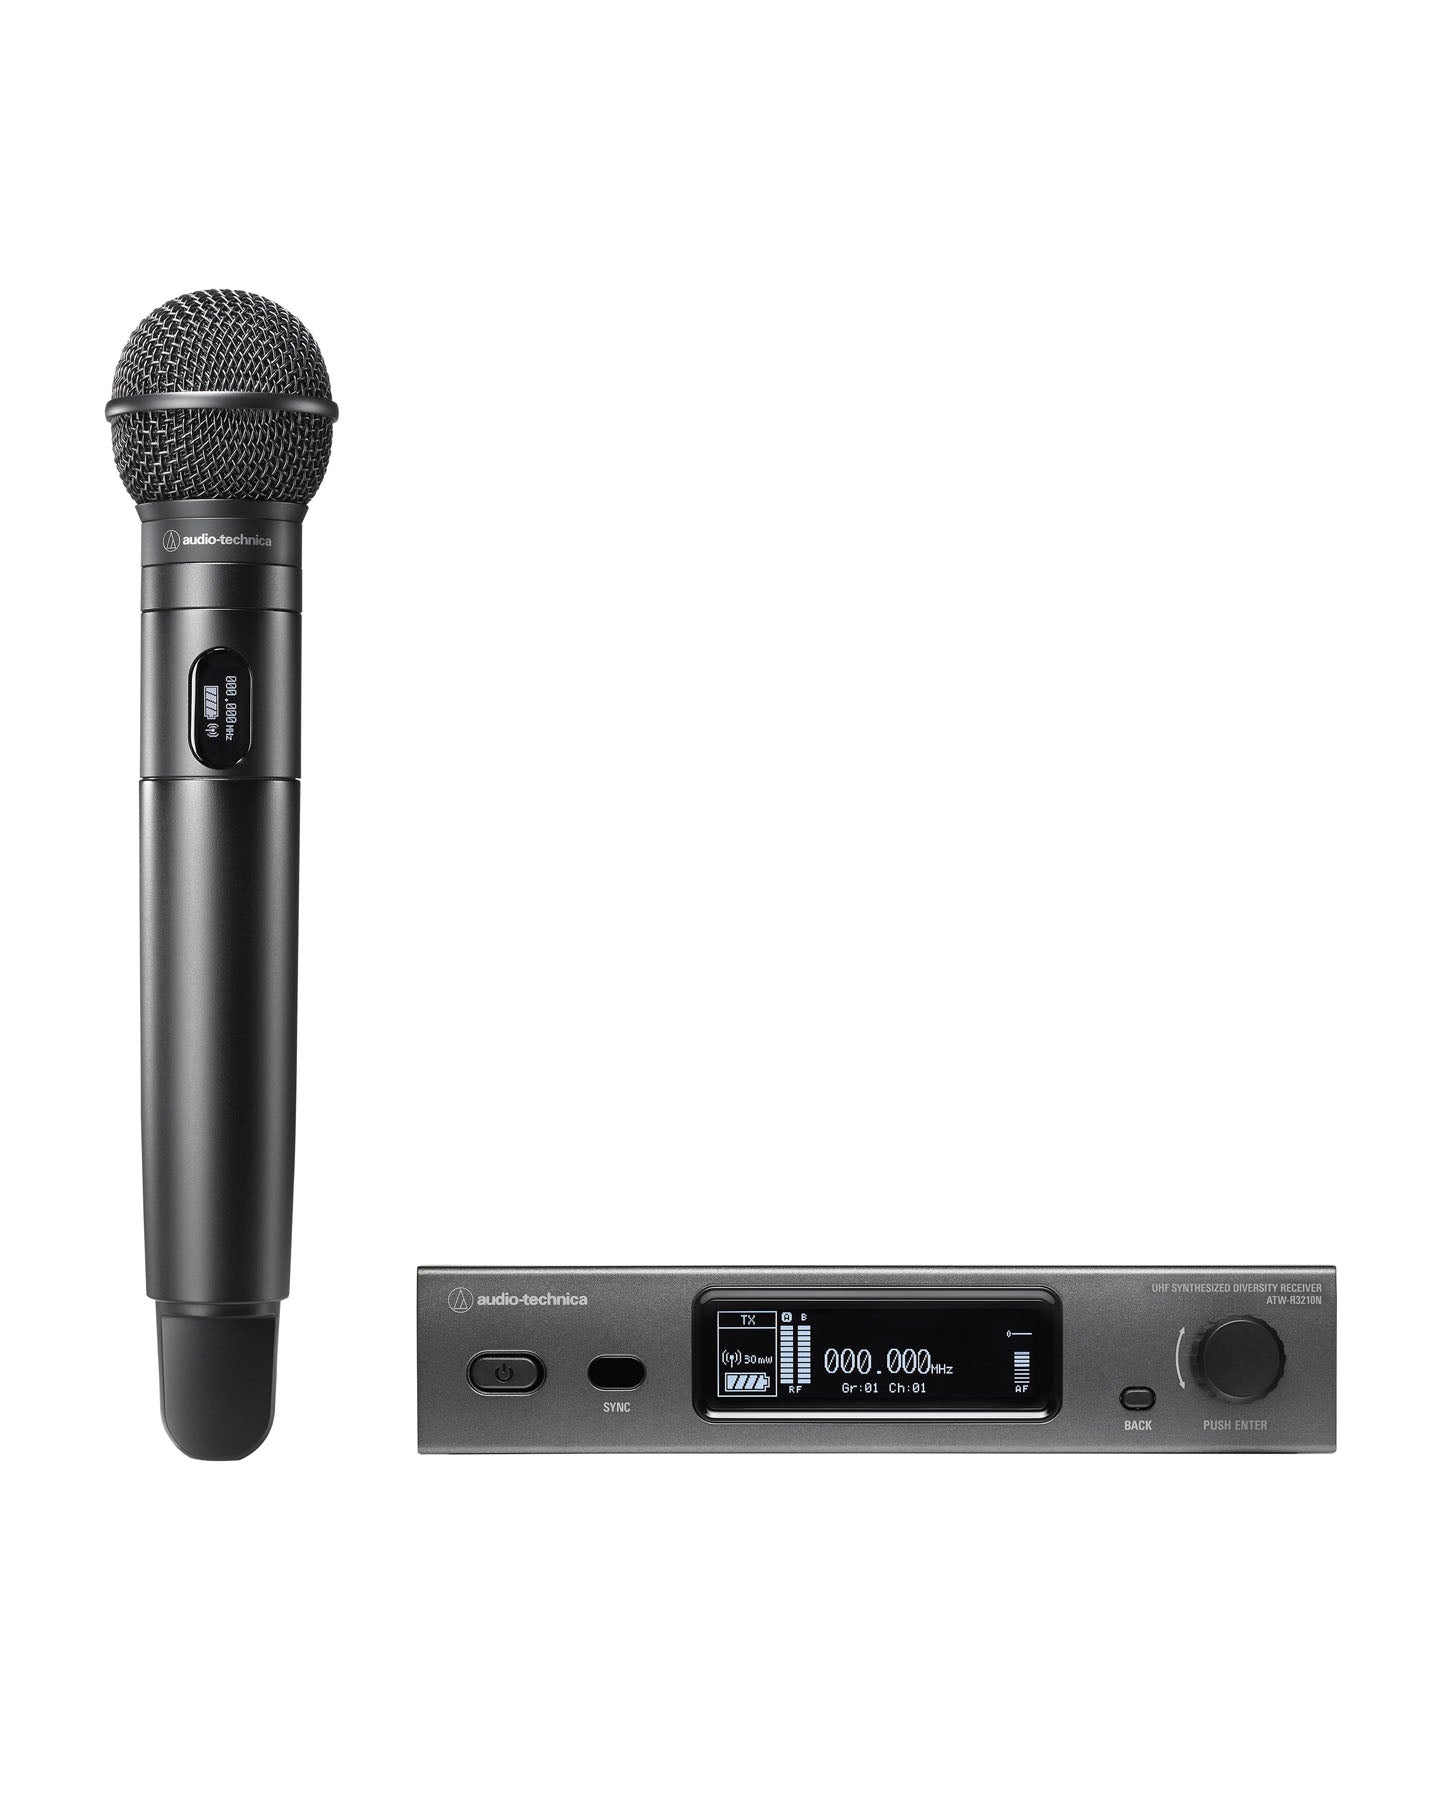 3000 Series Wireless Handheld Microphone System with ATW-C510 Capsule, DE2: 470 to 530 MHz